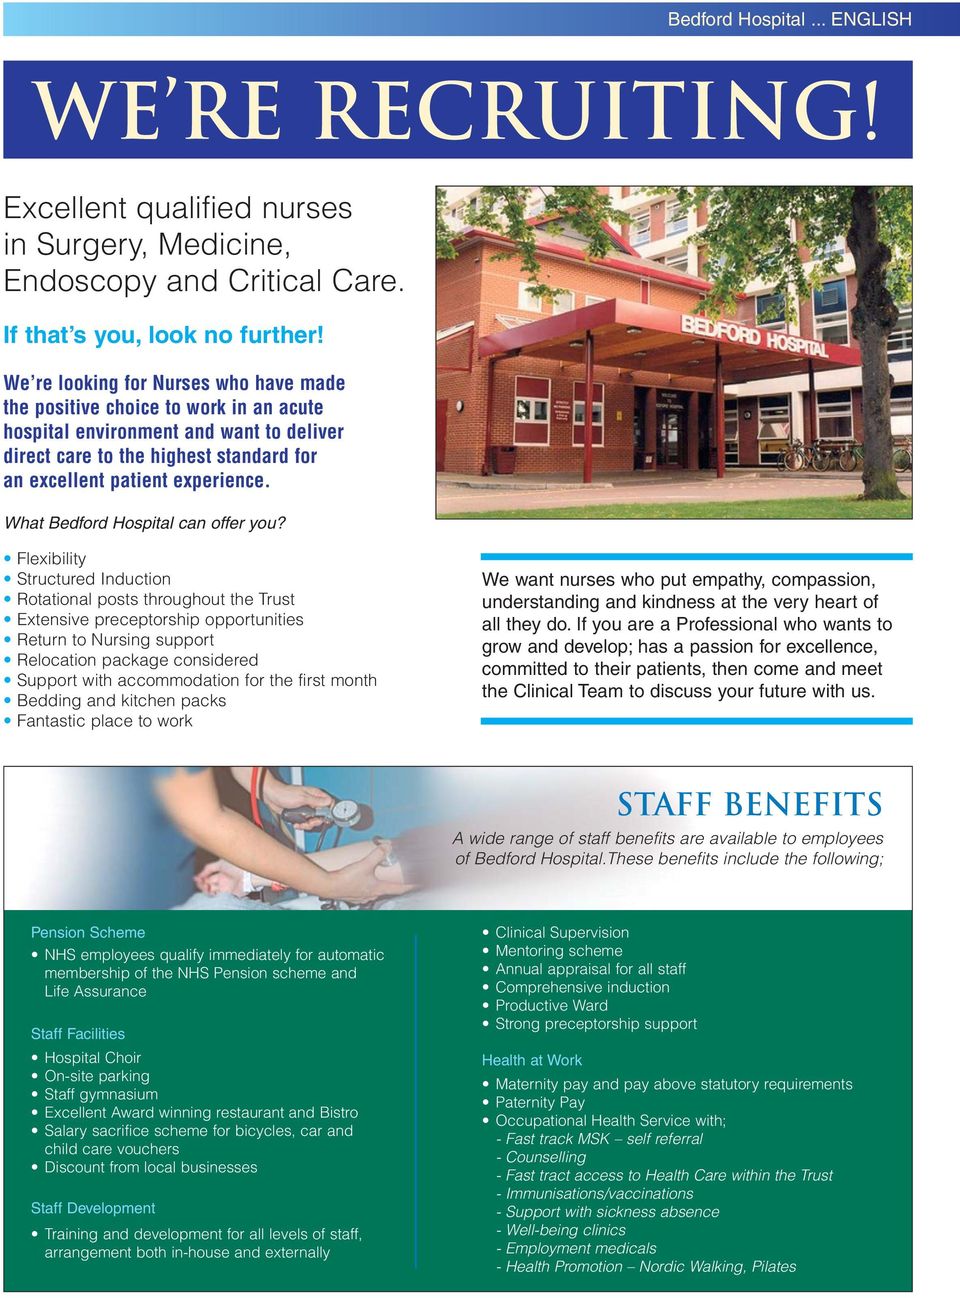 What Bedford Hospital can offer you?